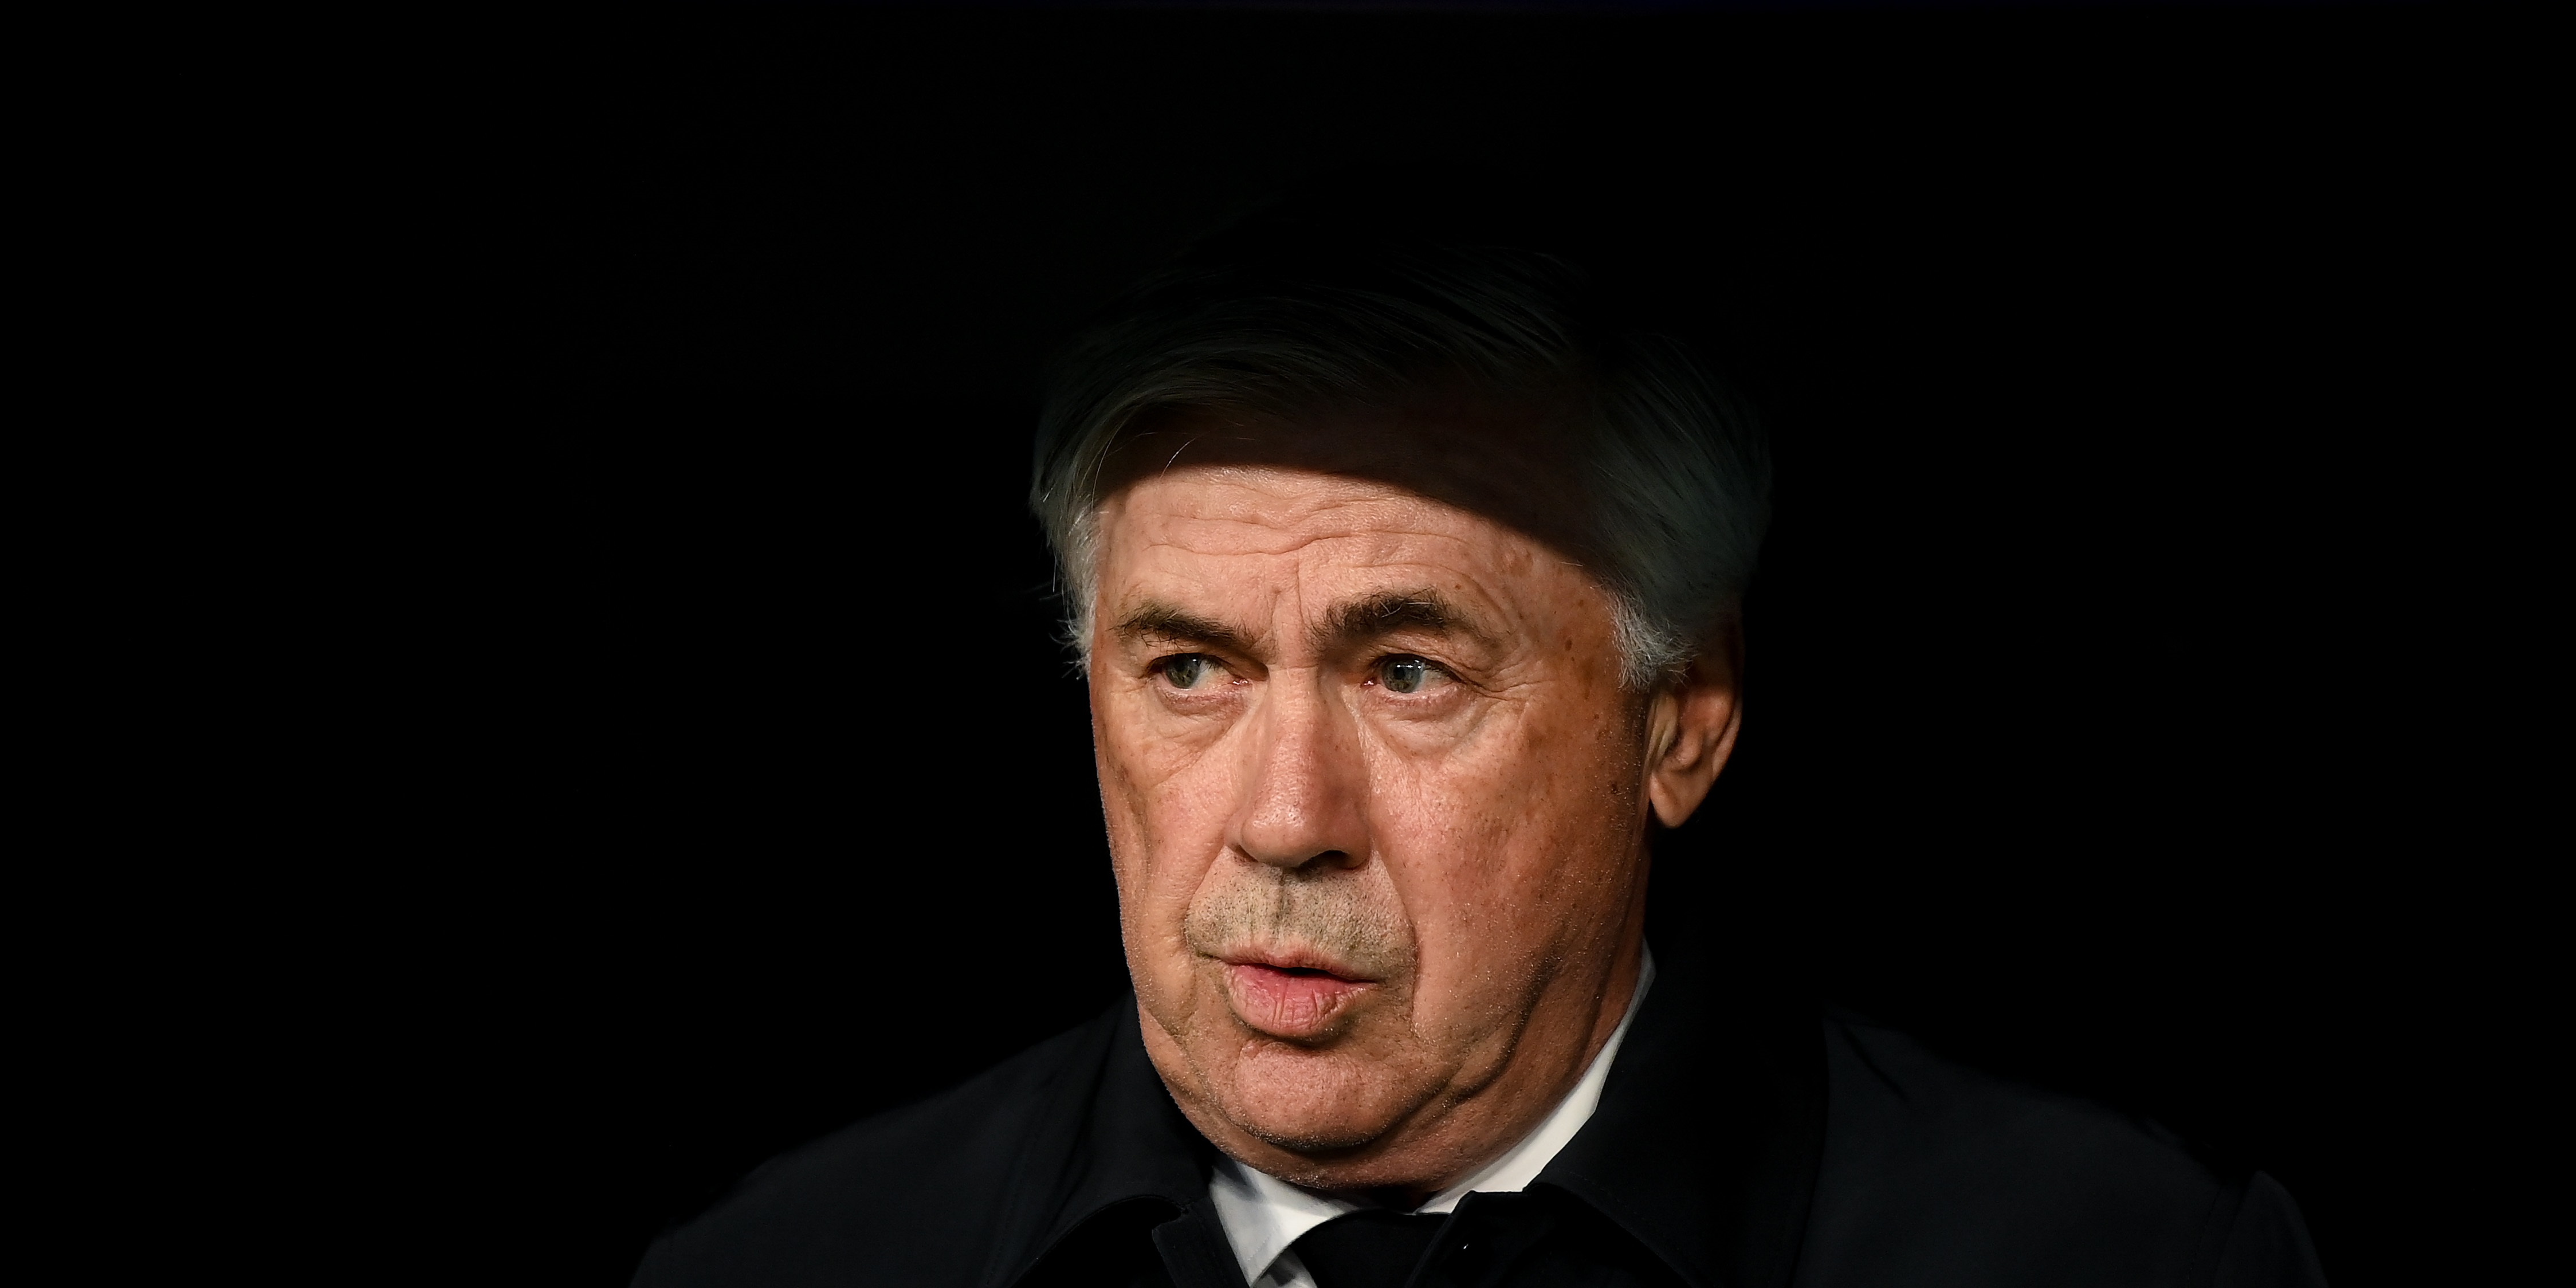 Ancelotti warns Liverpool about what they can expect from Real Madrid in the Champions League final: ‘That’s the target’